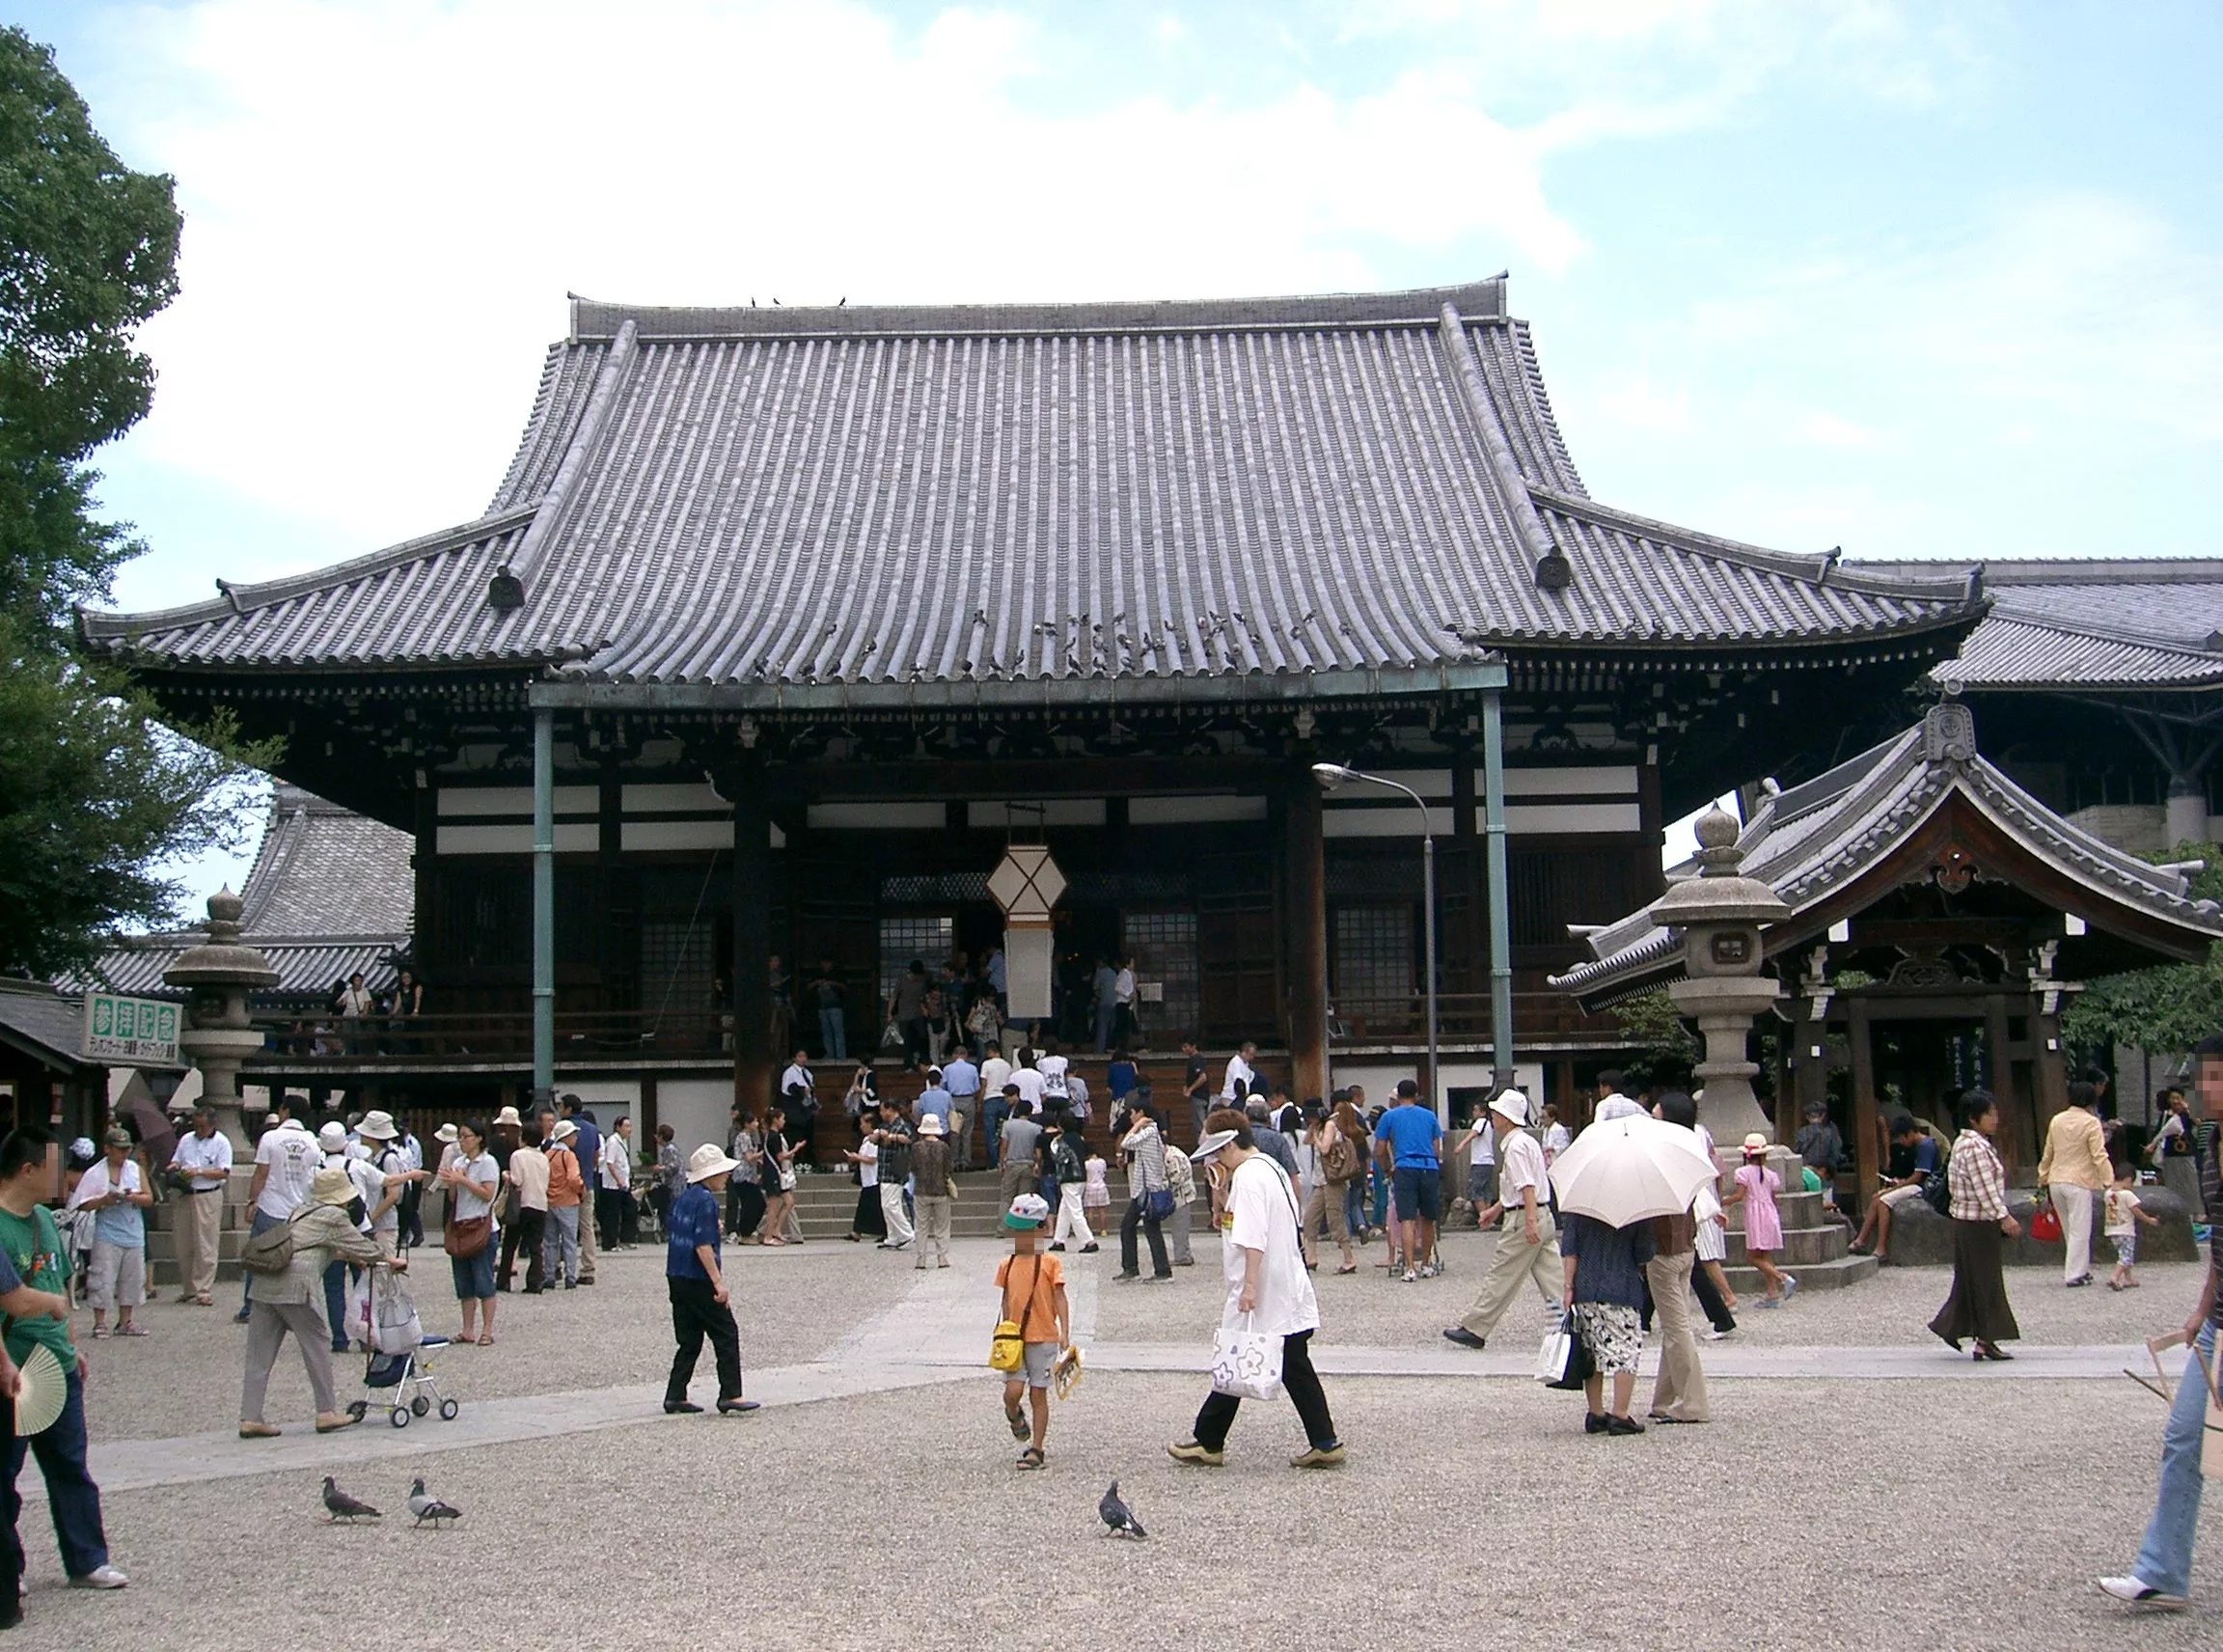 Isshin-ji in Japan, East Asia | Architecture - Rated 3.4